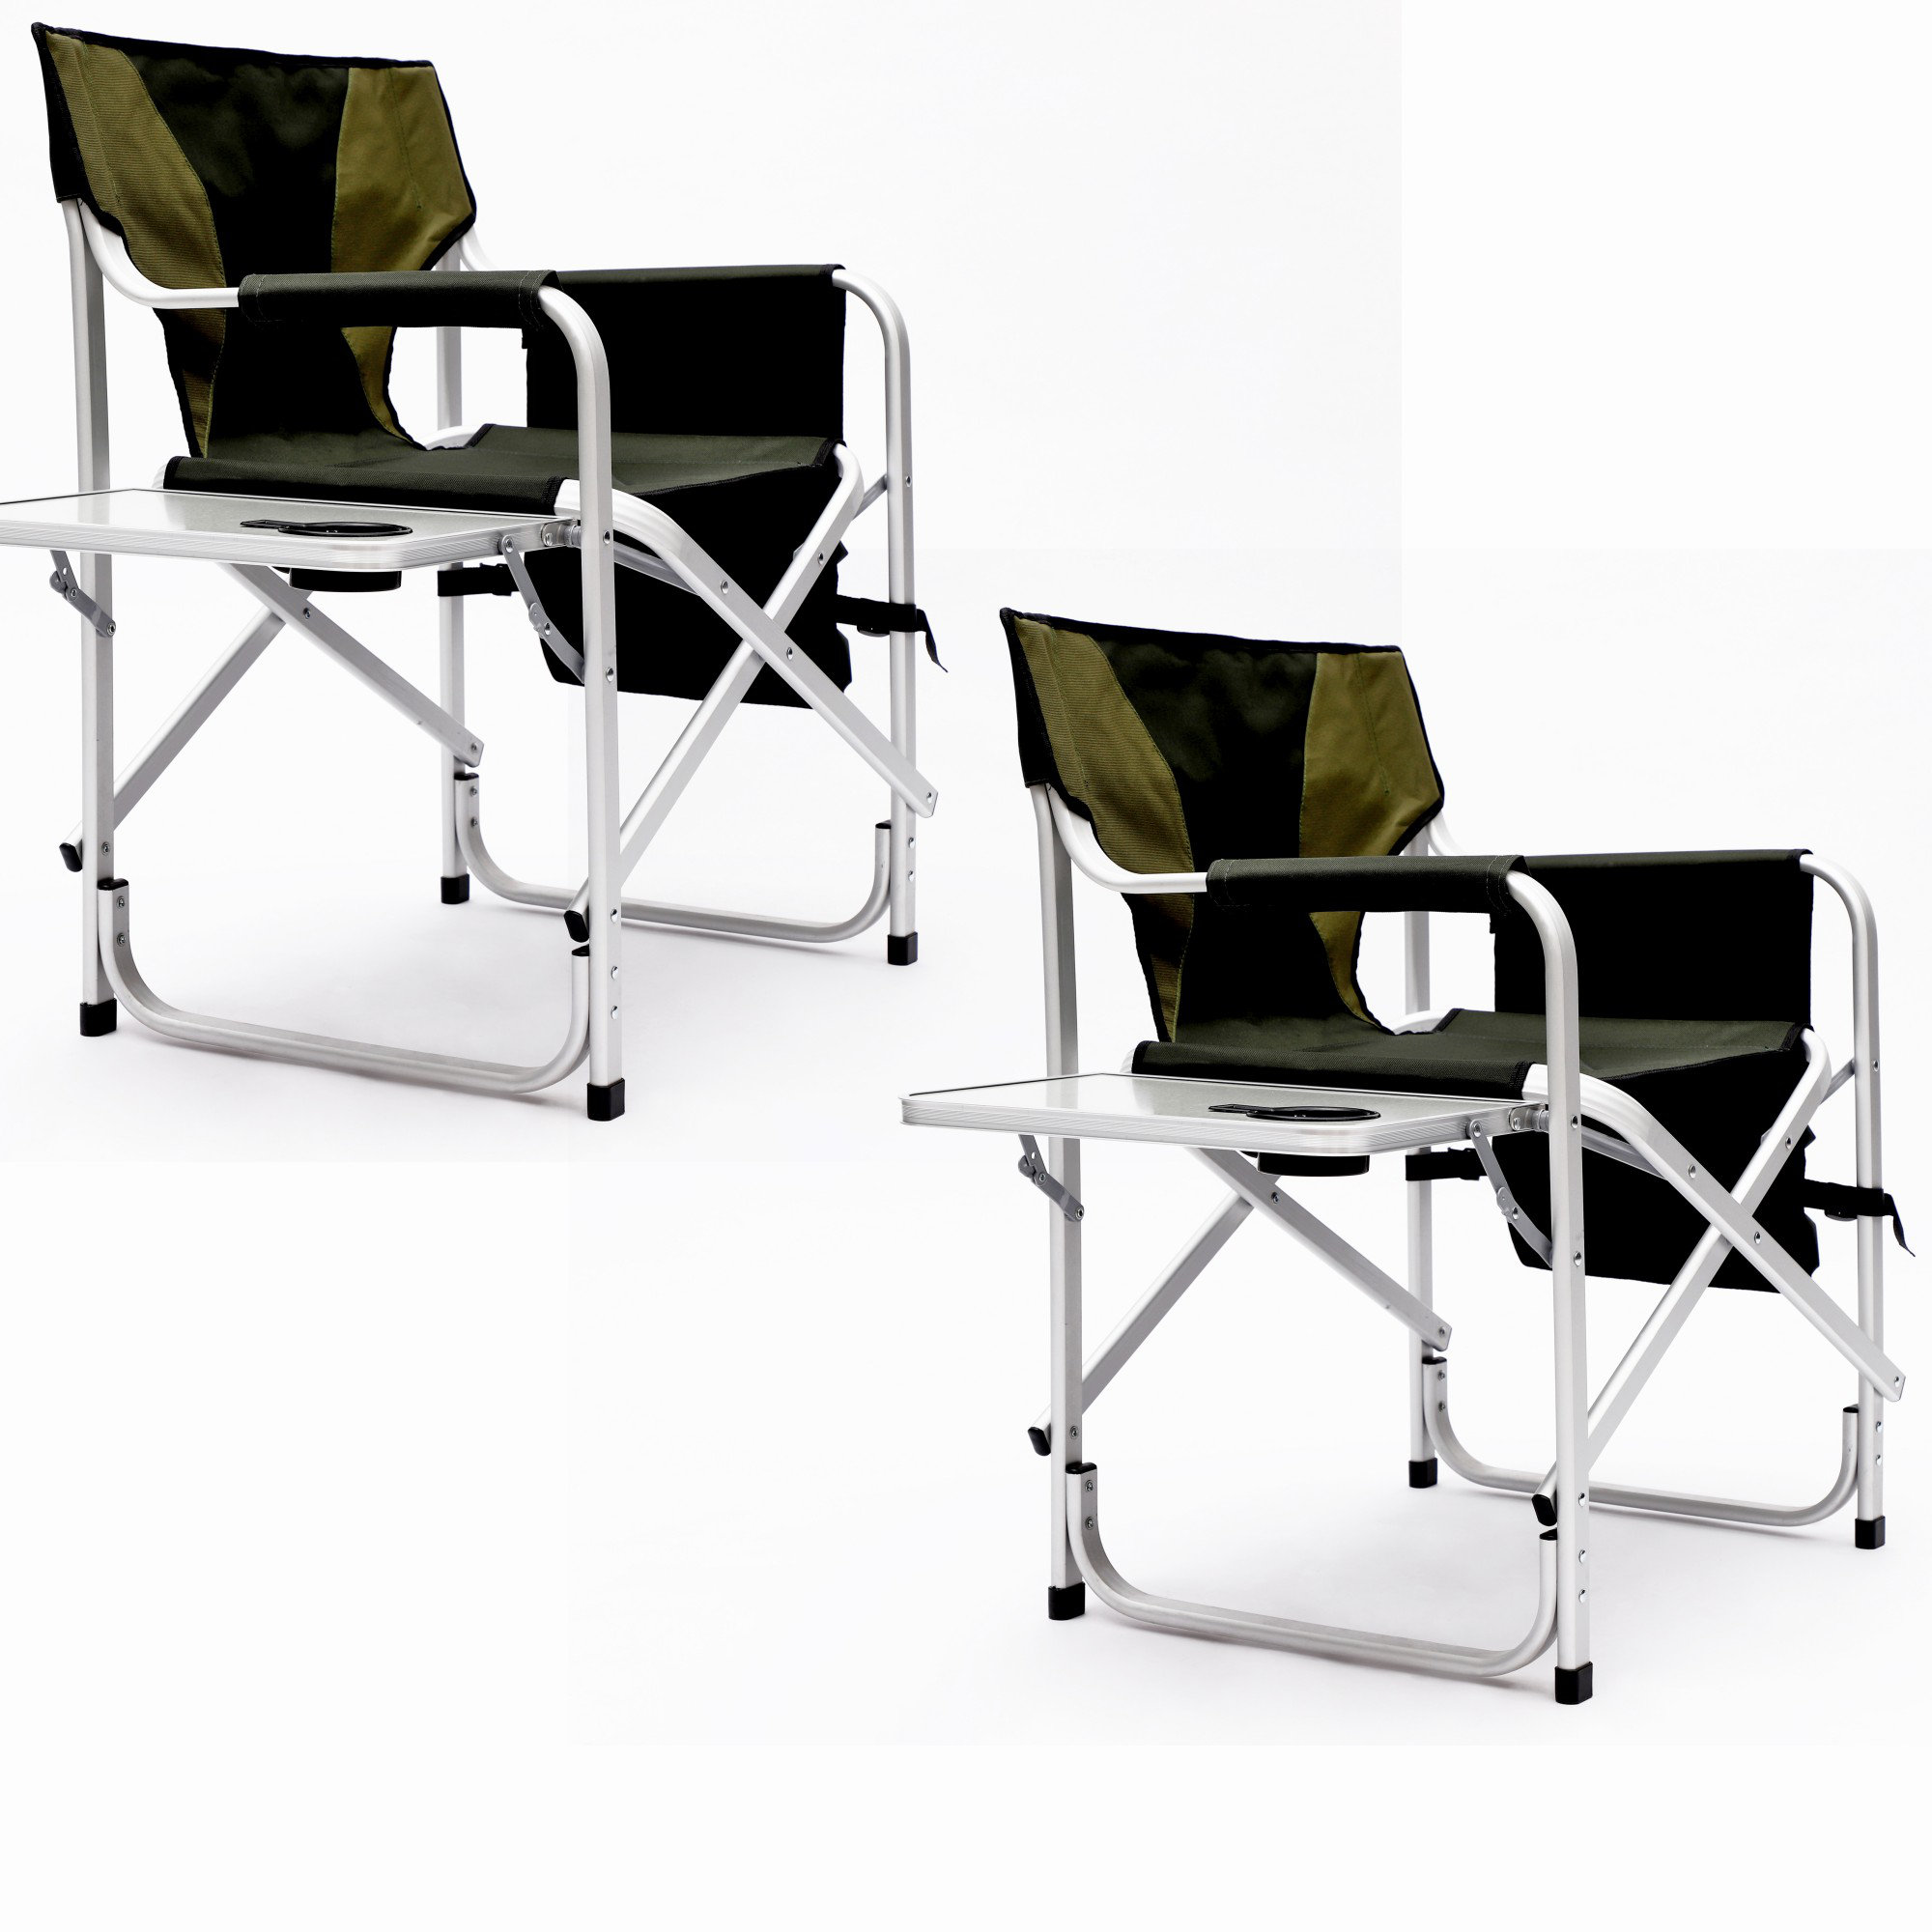 Portable Camping Chair with A 400-lb Metal Frame and Anti-Slip Feet